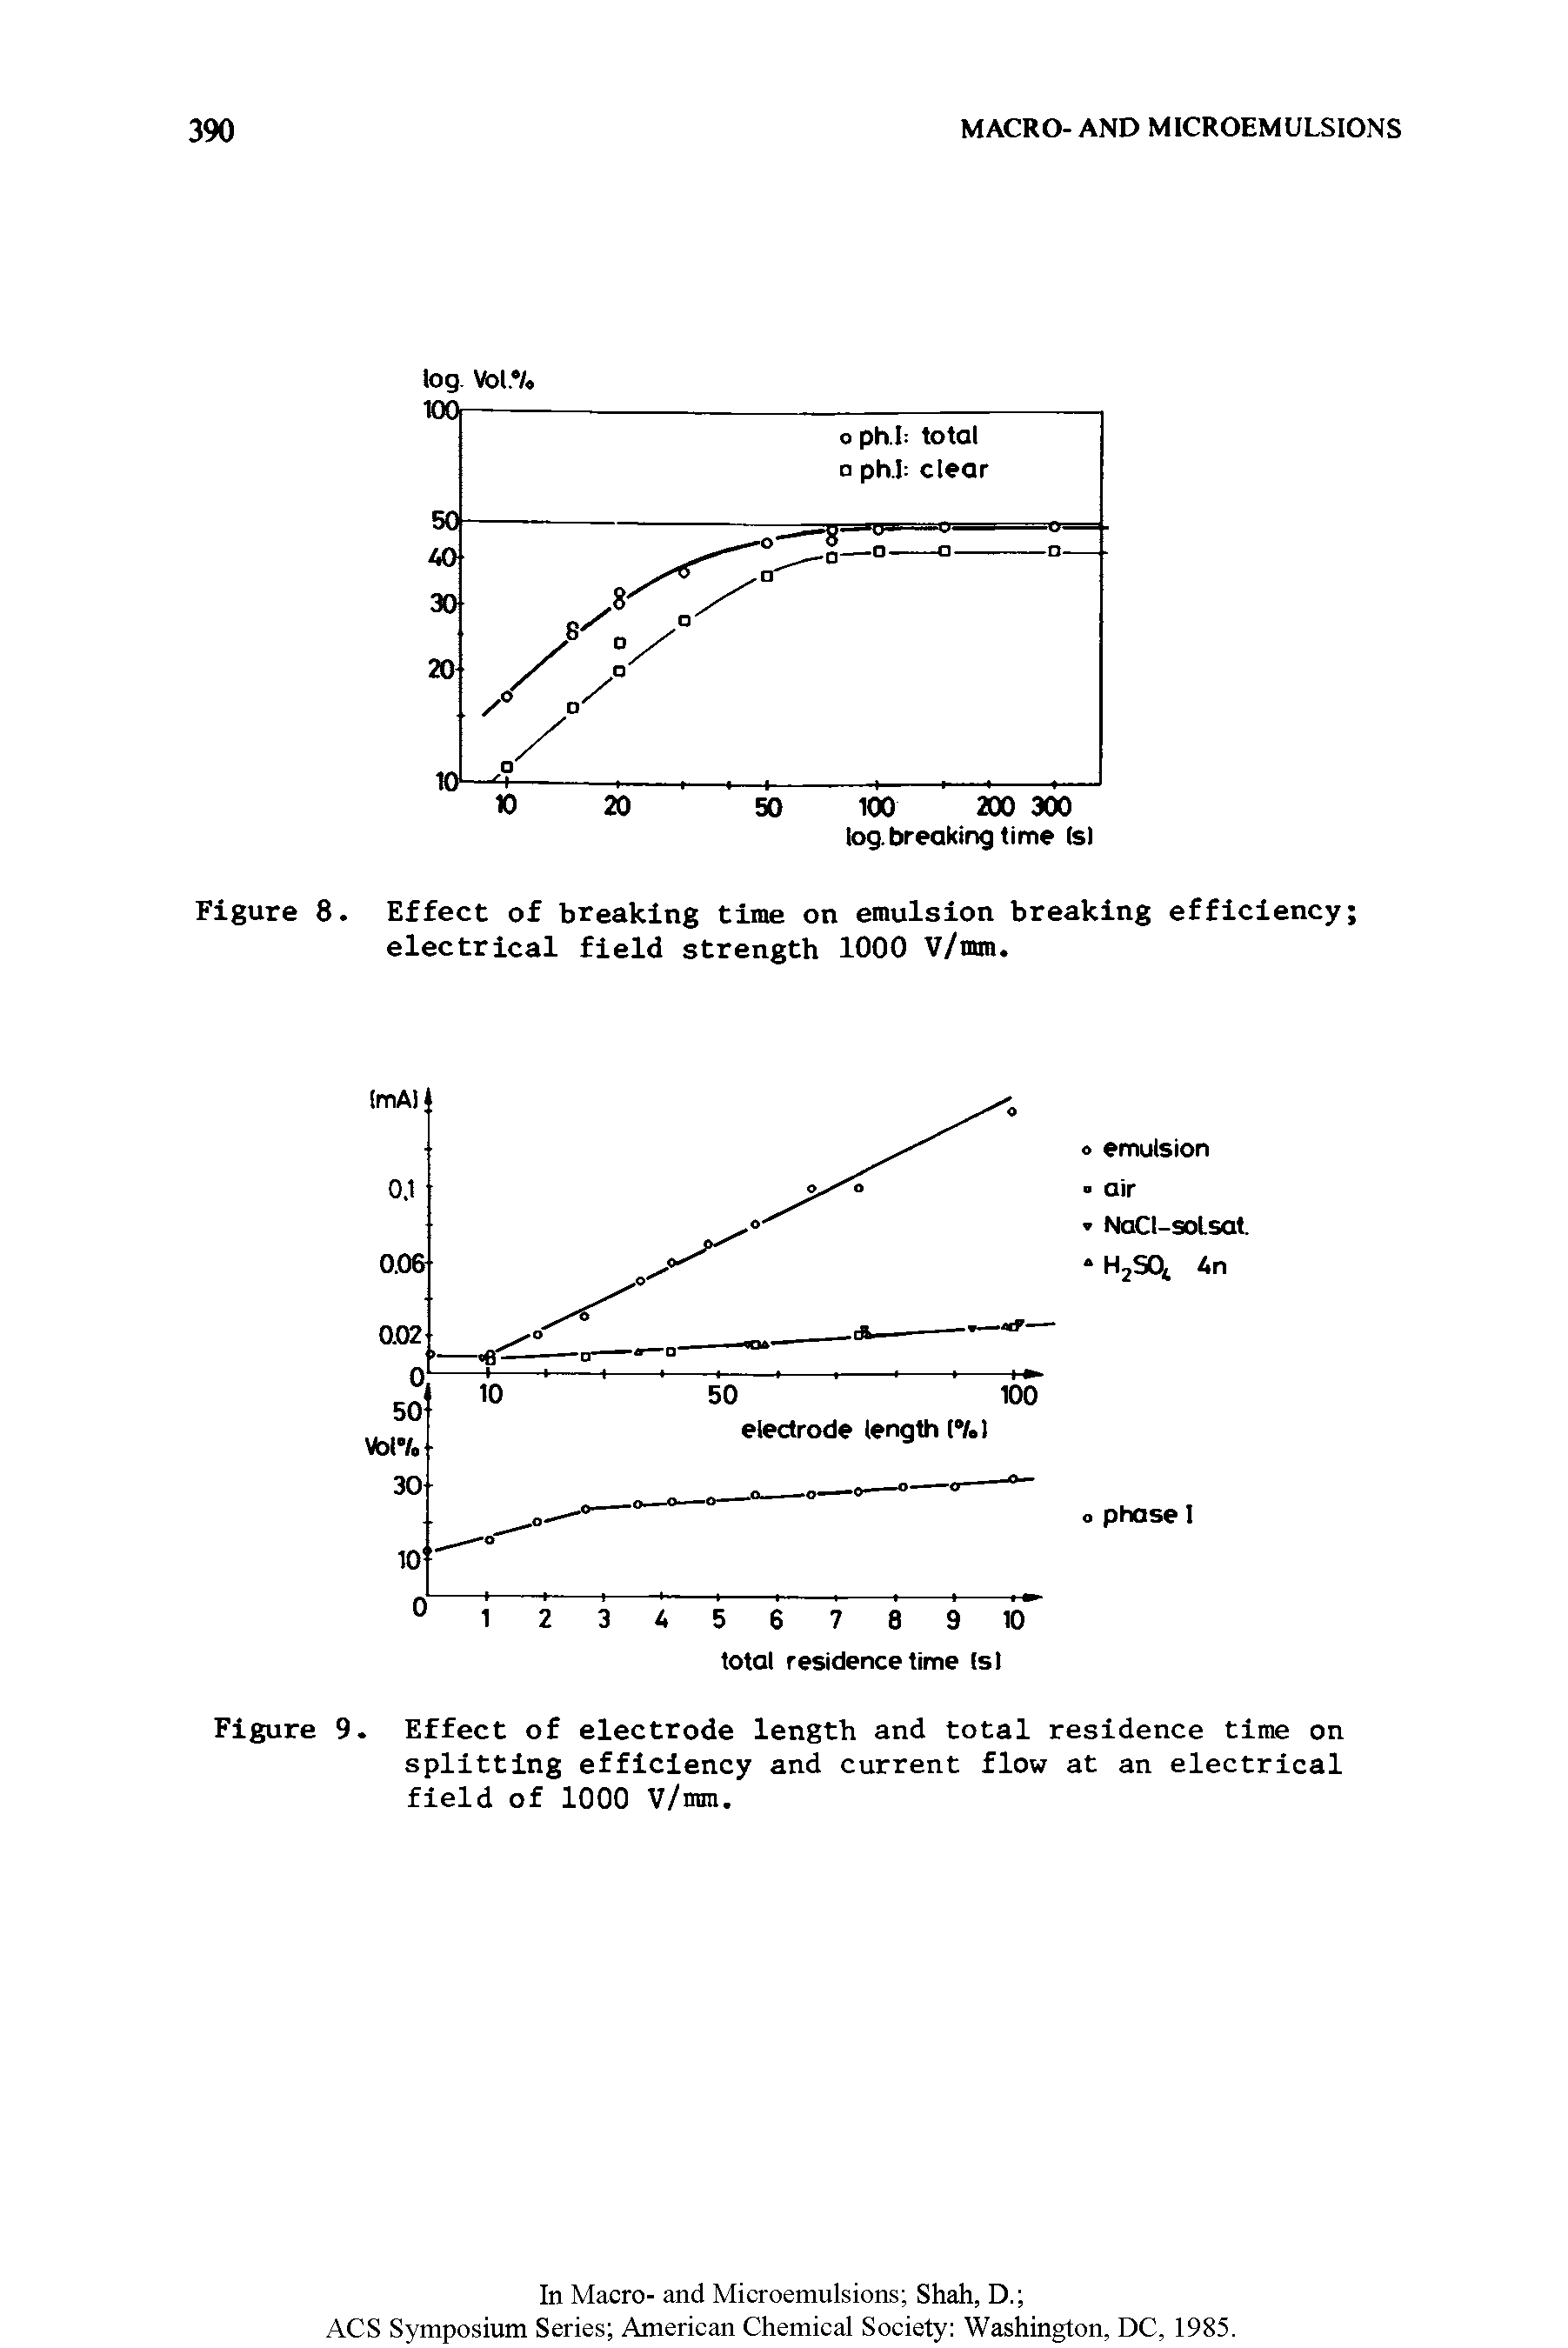 Figure 9. Effect of electrode length and total residence time on splitting efficiency and current flow at an electrical field of 1000 V/mm.